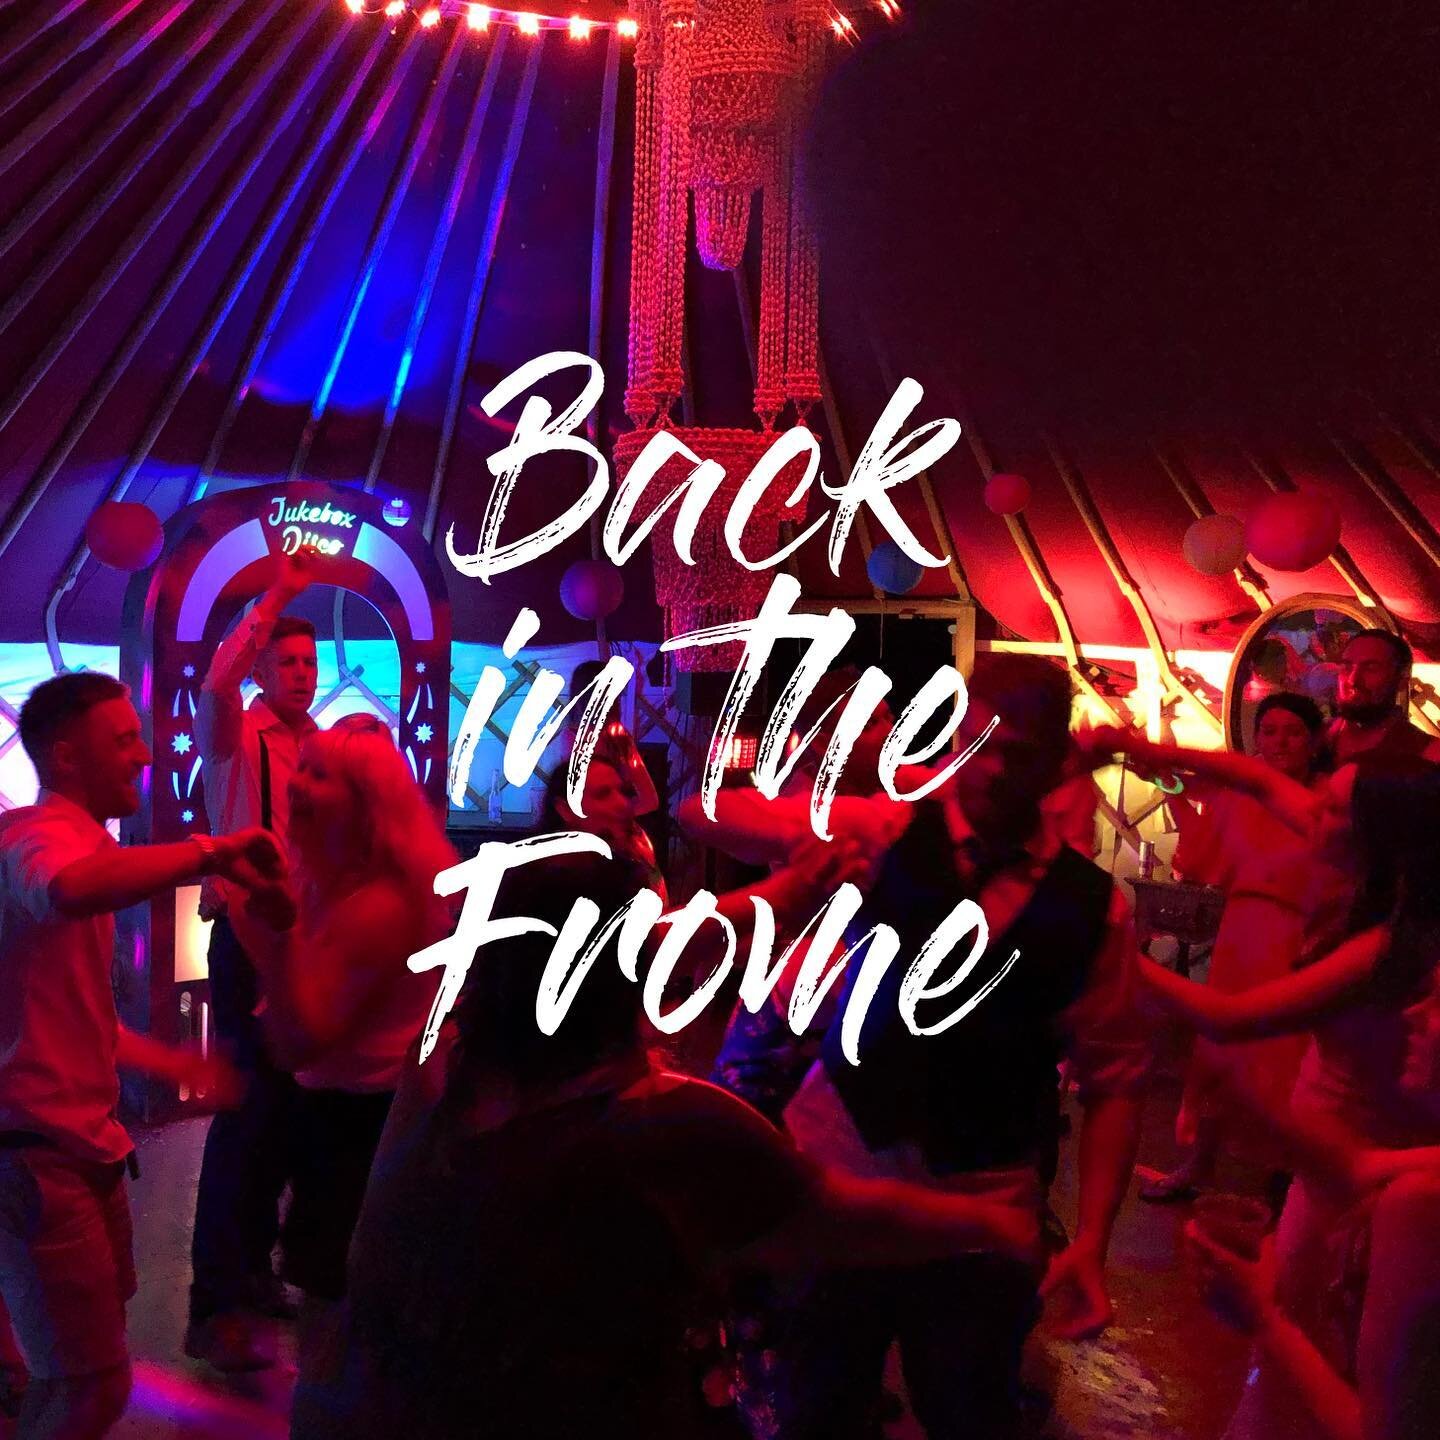 We are very pleased to announce that we are back where it all began. 

See you all soon, whether it&rsquo;s on the cobbled streets or the dance floor!

🥳🥳🥳🥳🥳

#frome
#backinthefrome
#partytime 
#weliketoparty